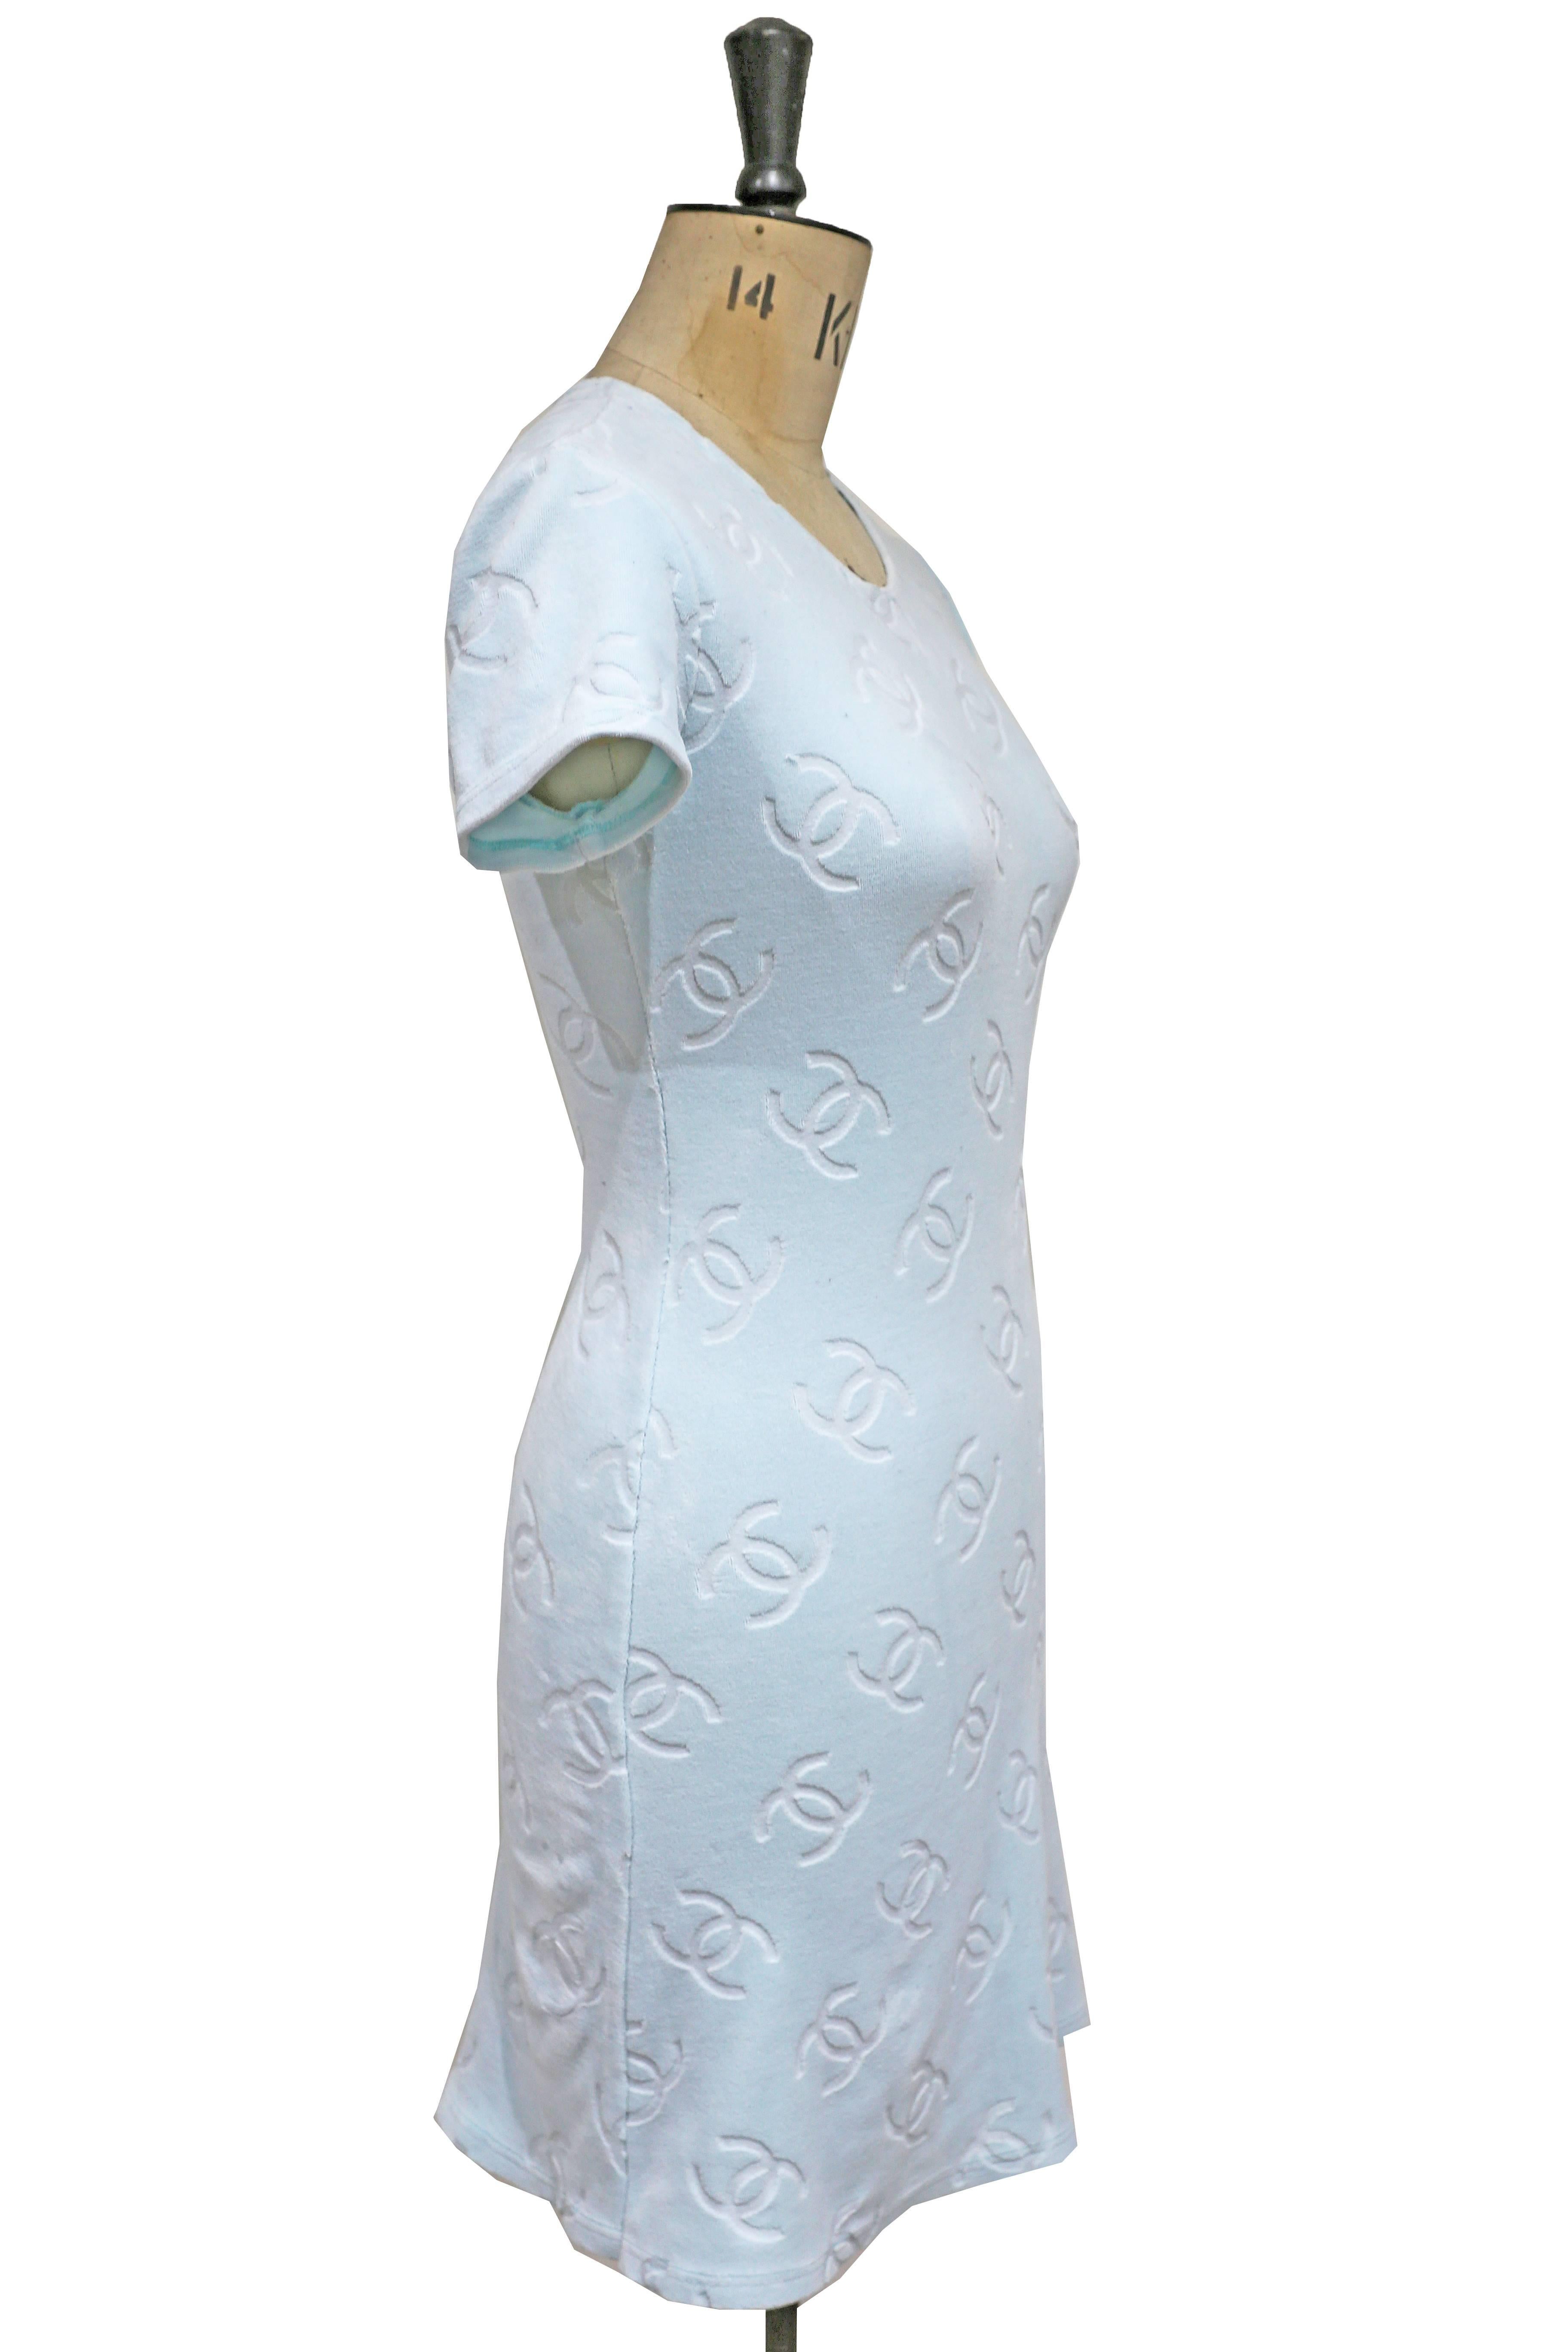 Chanel velour baby blue dress from the spring-summer 1996 collection. The dress features a 'CC' monogram design and is very figure hugging. 

FRENCH (EU) 40 - ITALIAN 44 - UK 12 - US 8 - MEDIUM